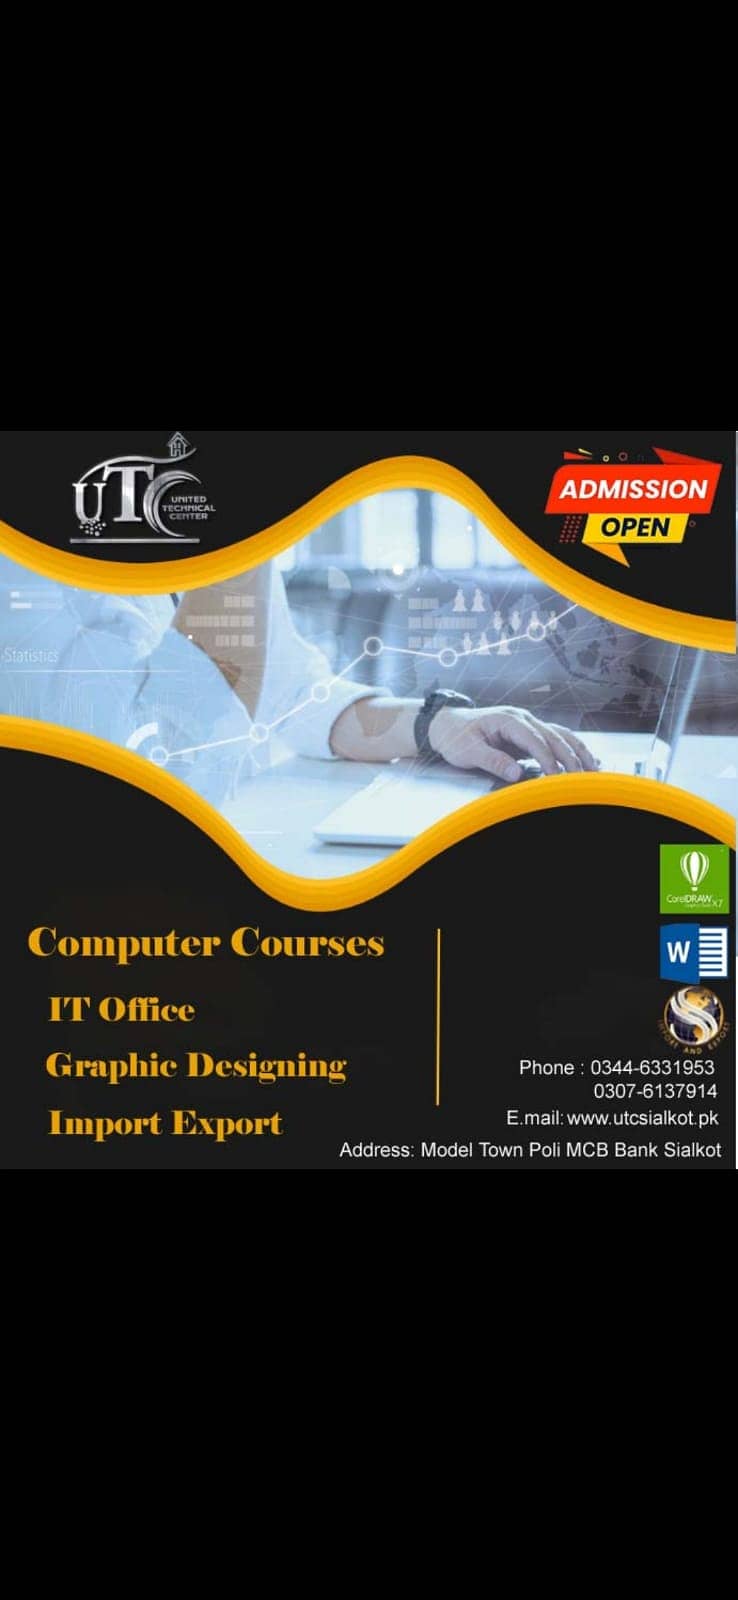 Computer Course/IT Office/Graphic Designing/Health And Safety Course 1